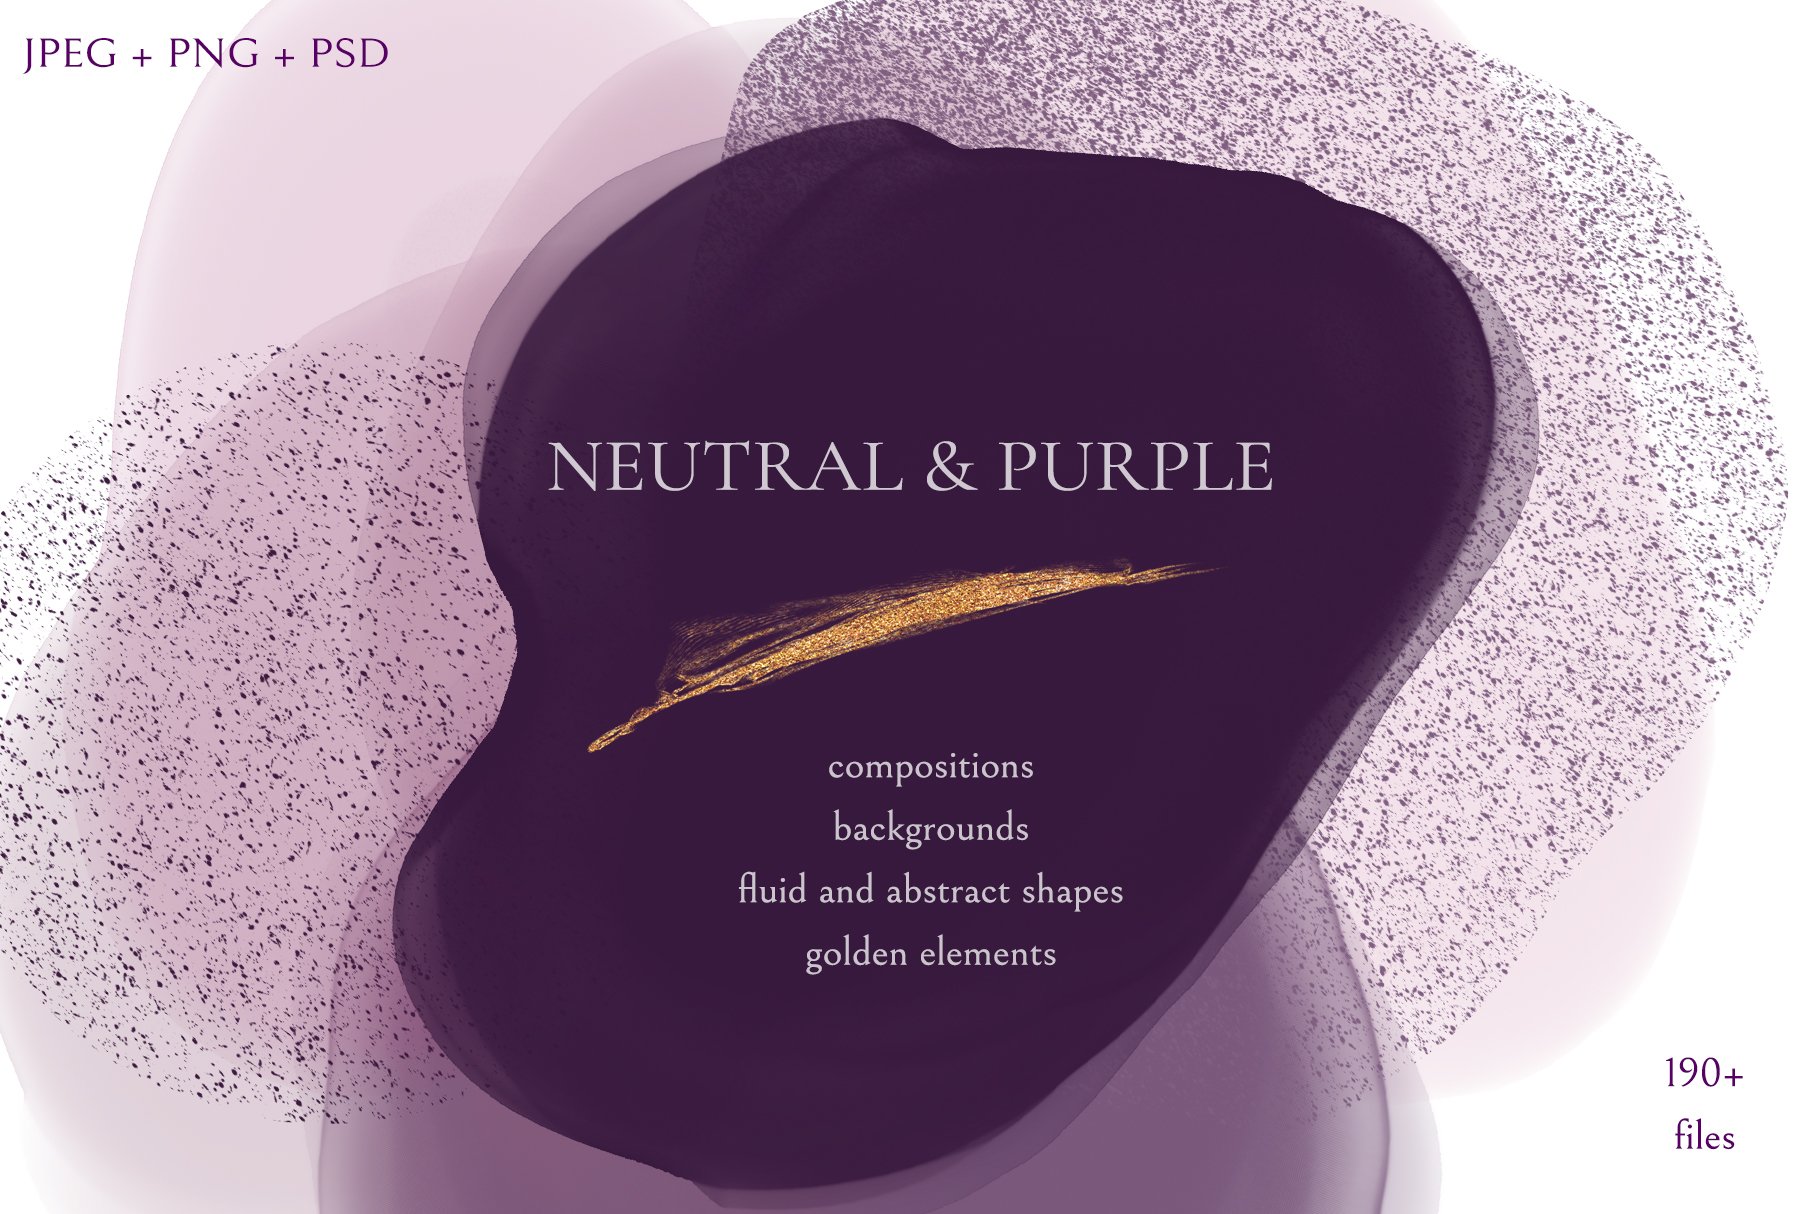 Neutral & Purple cover image.